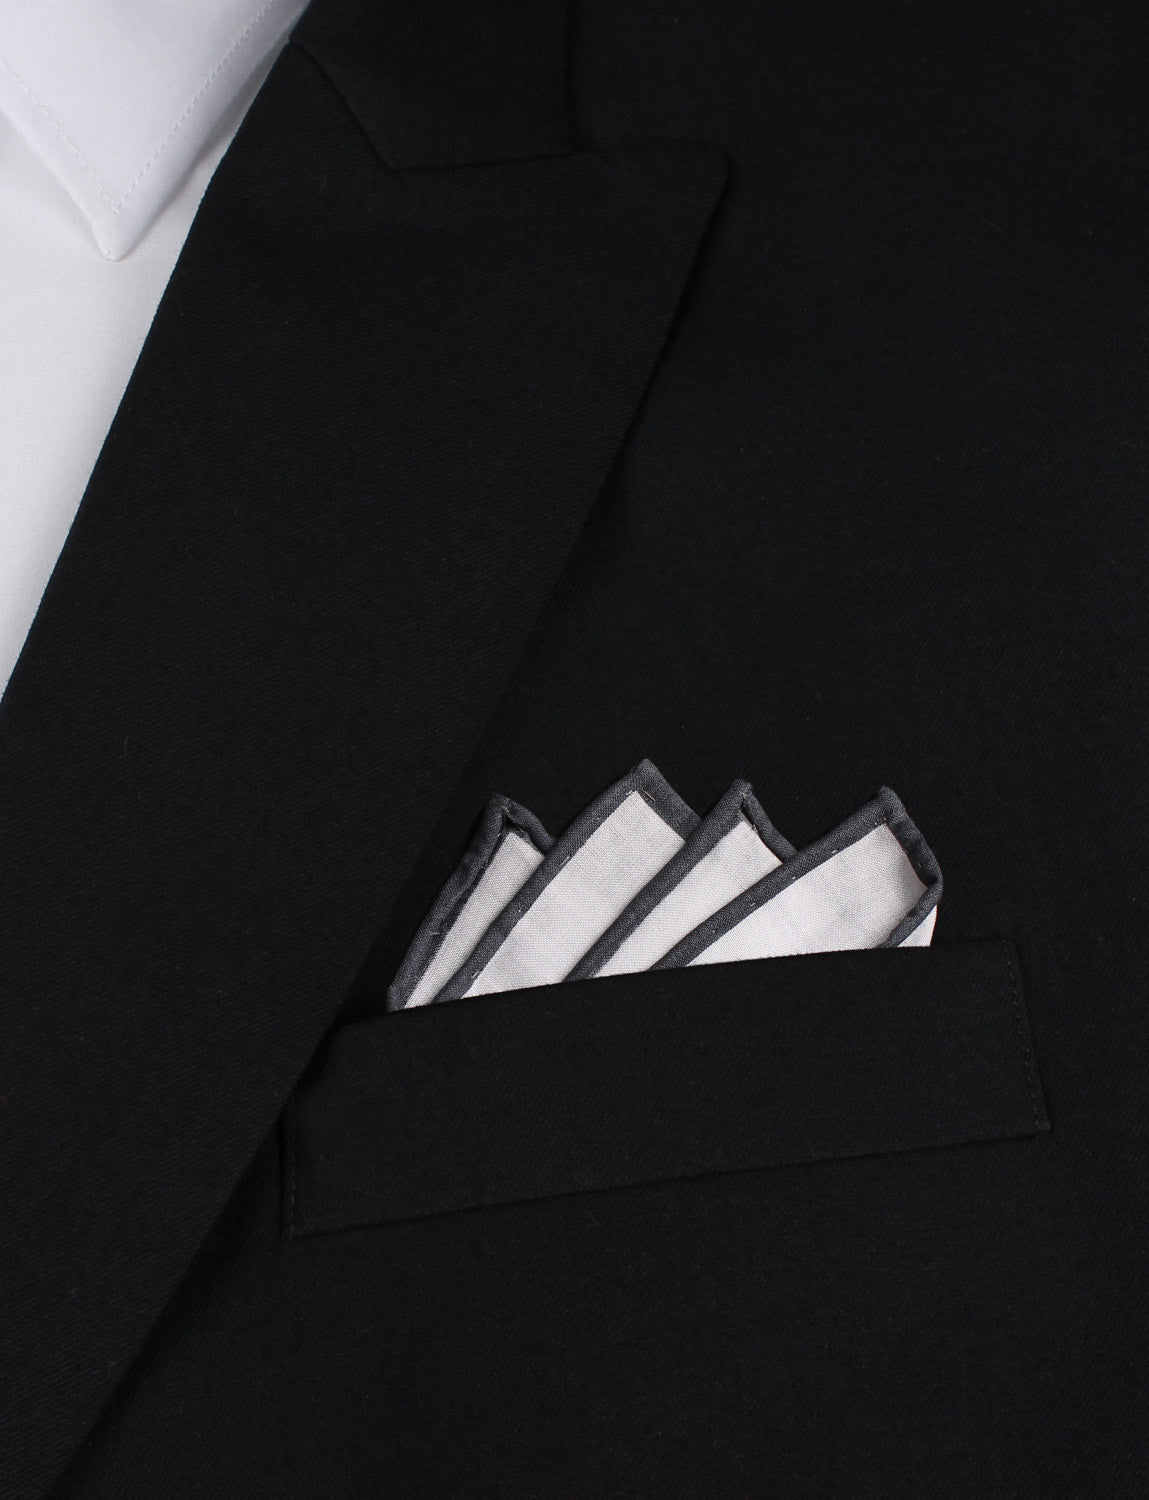 White Cotton Pocket Square with Charcoal Grey Border Point Fold